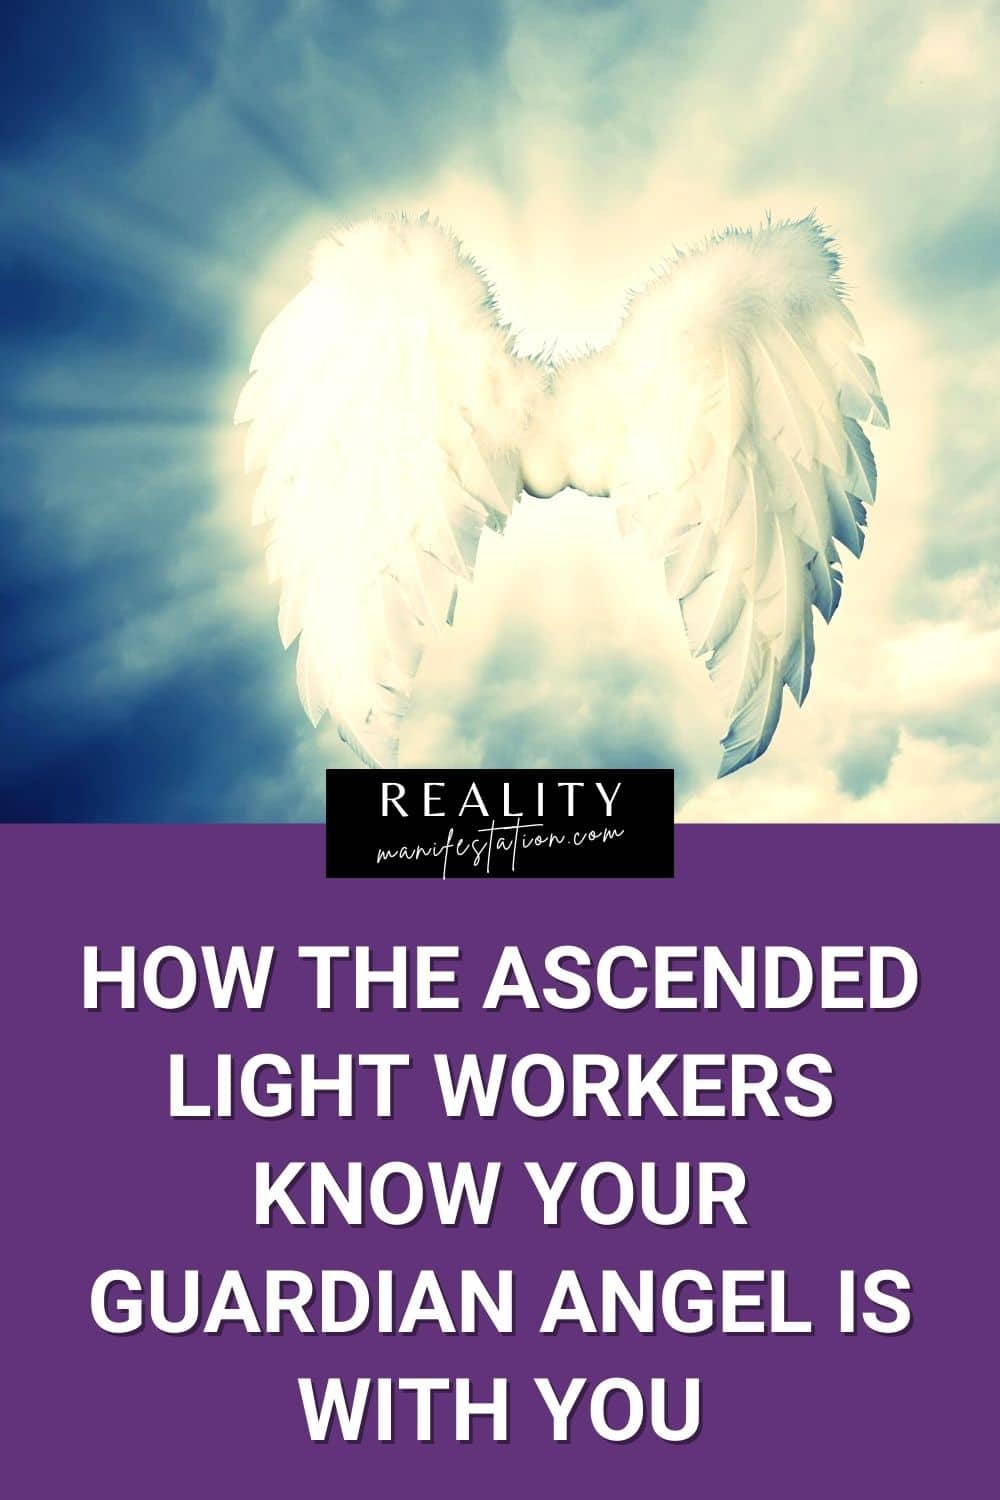 Image with angel wings above some clouds with a purple box with text underneath saying How The Ascended Light Workers Know Your Guardian Angel Is With You